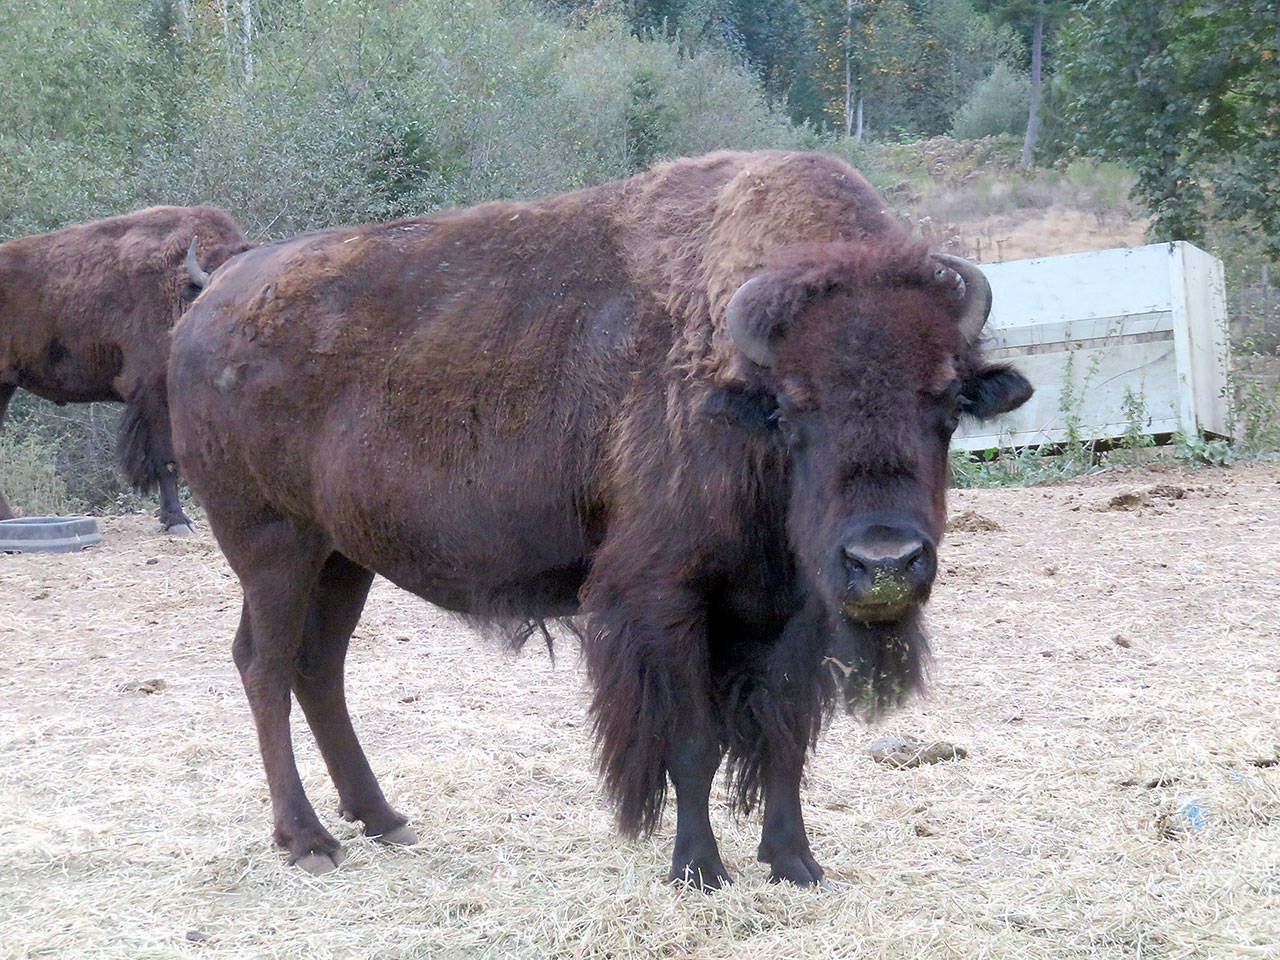 A bison stands in a field at Center Valley Animal Rescue in Quilcene. The animals spent the winter at a farm in Washougal but have been back at the Jefferson County facility since this spring. (Center Valley Animal Rescue)